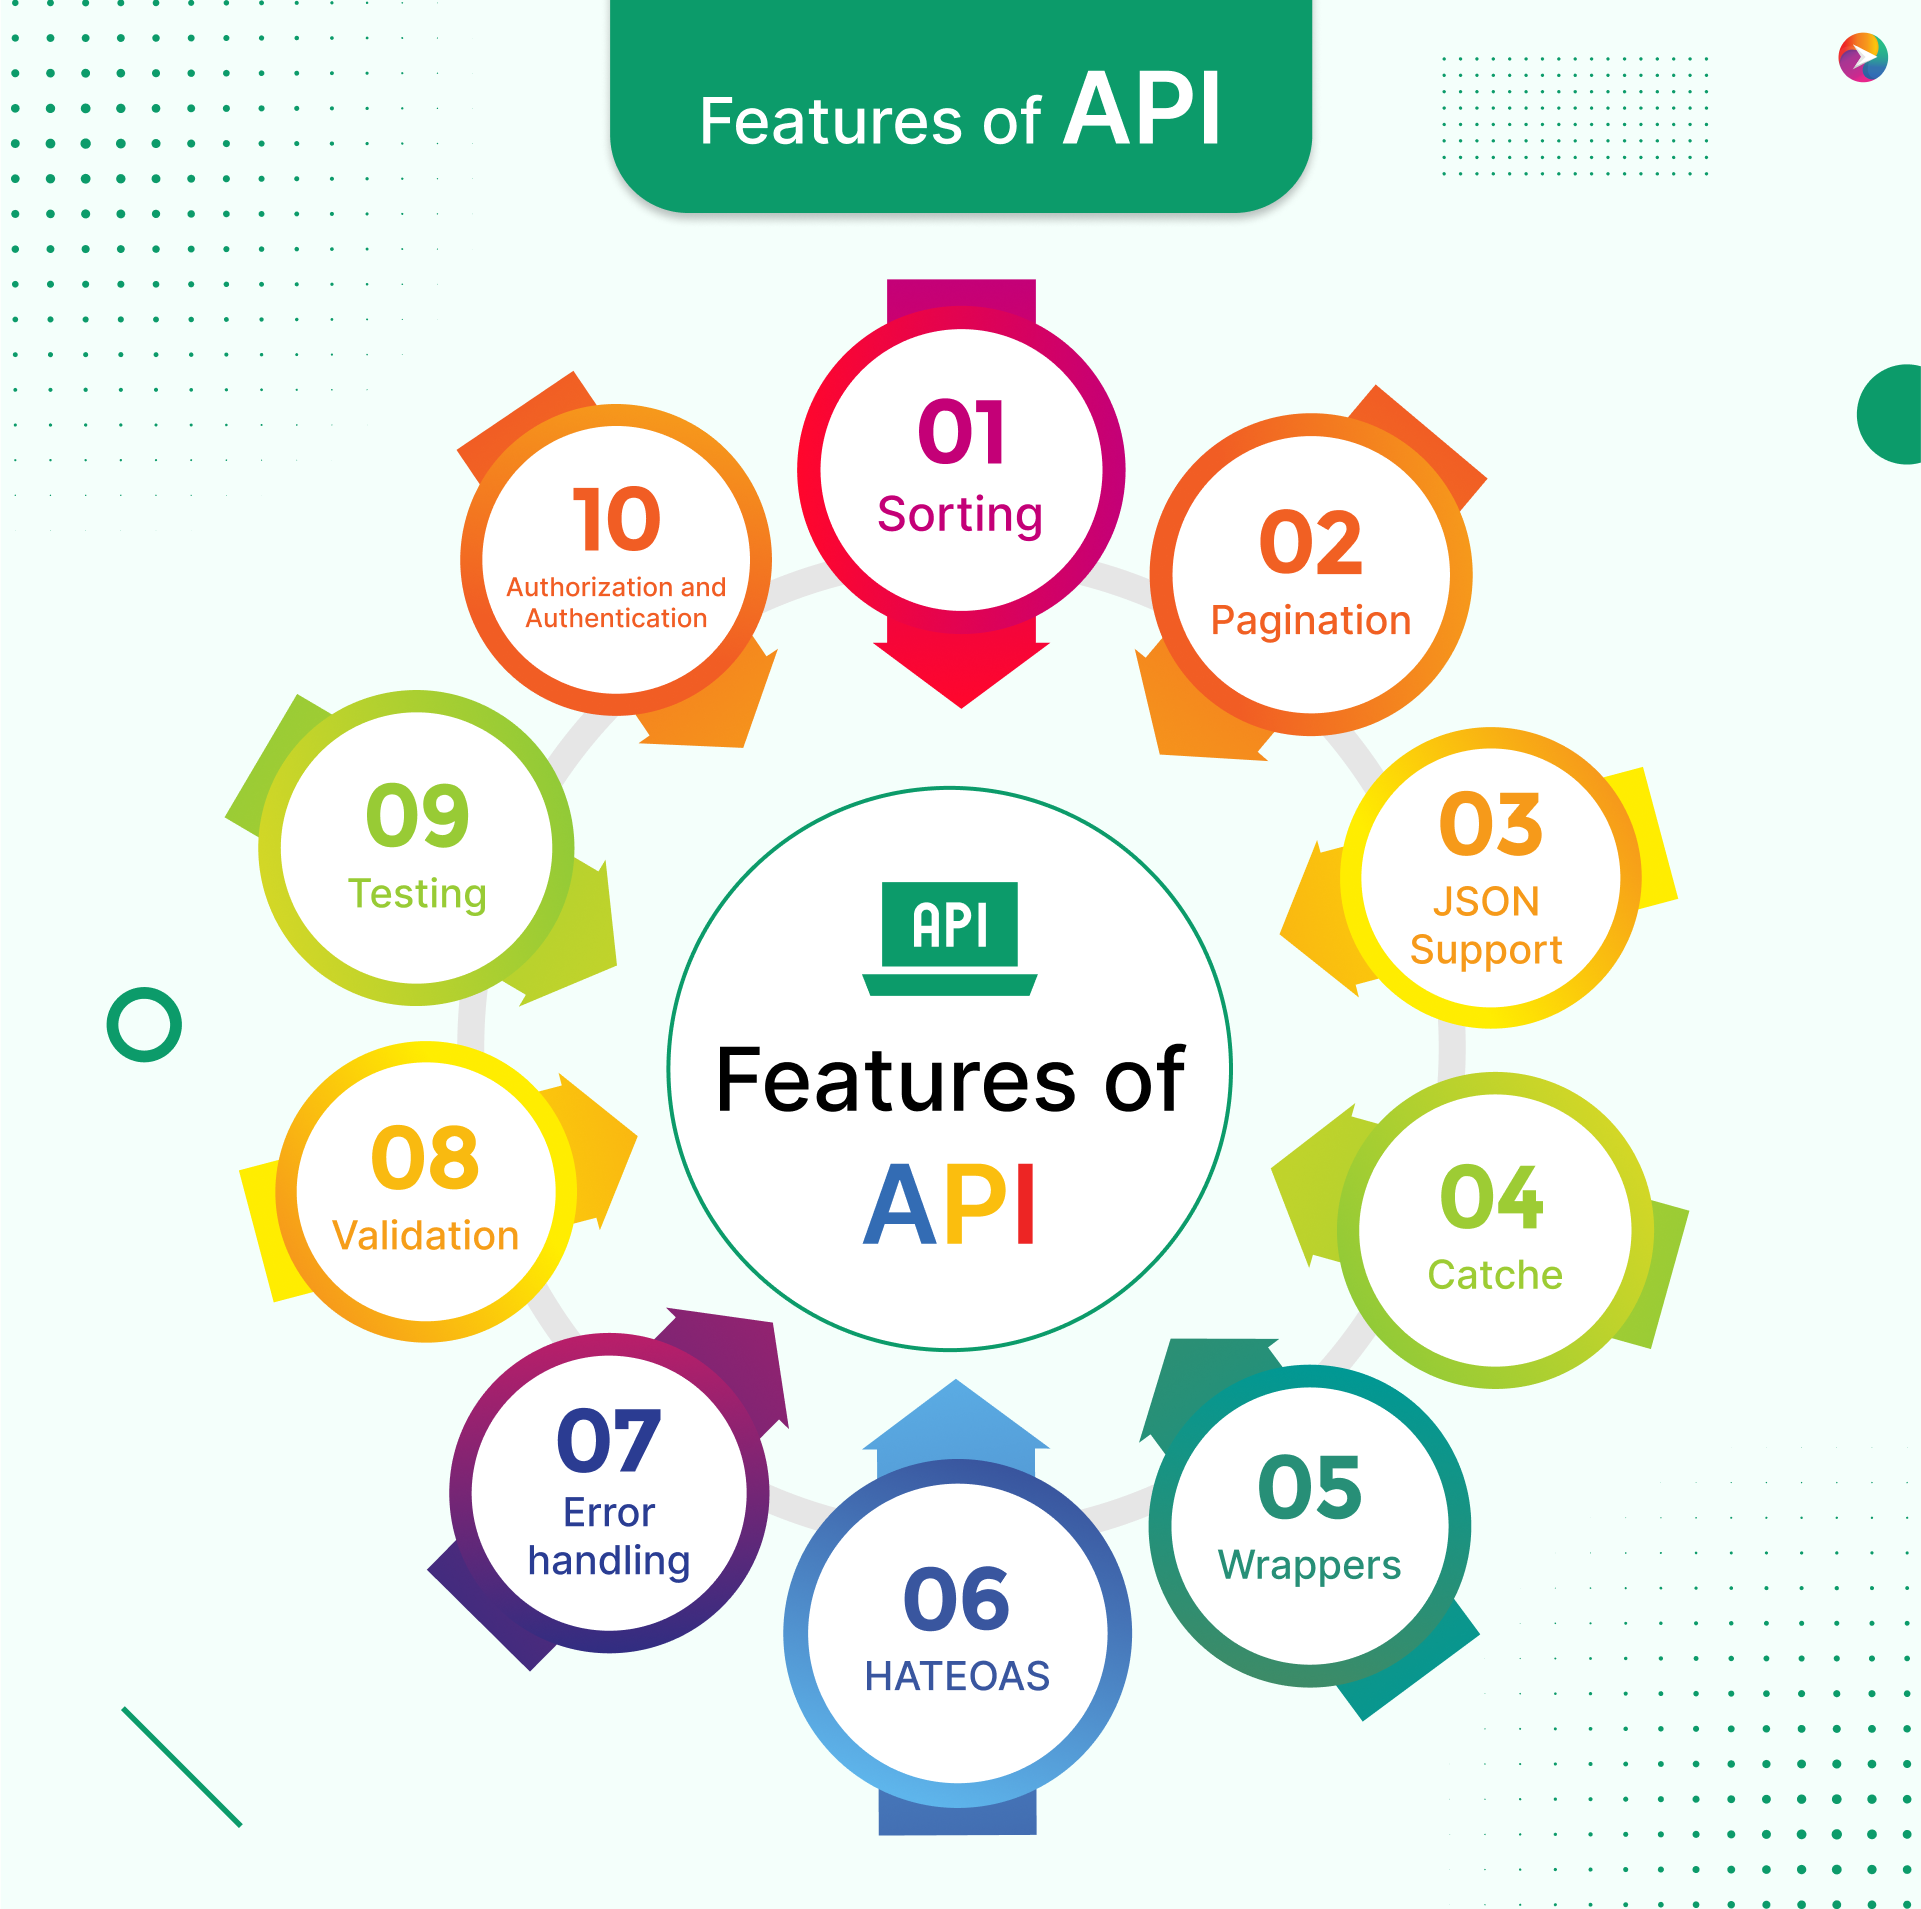 Features of API